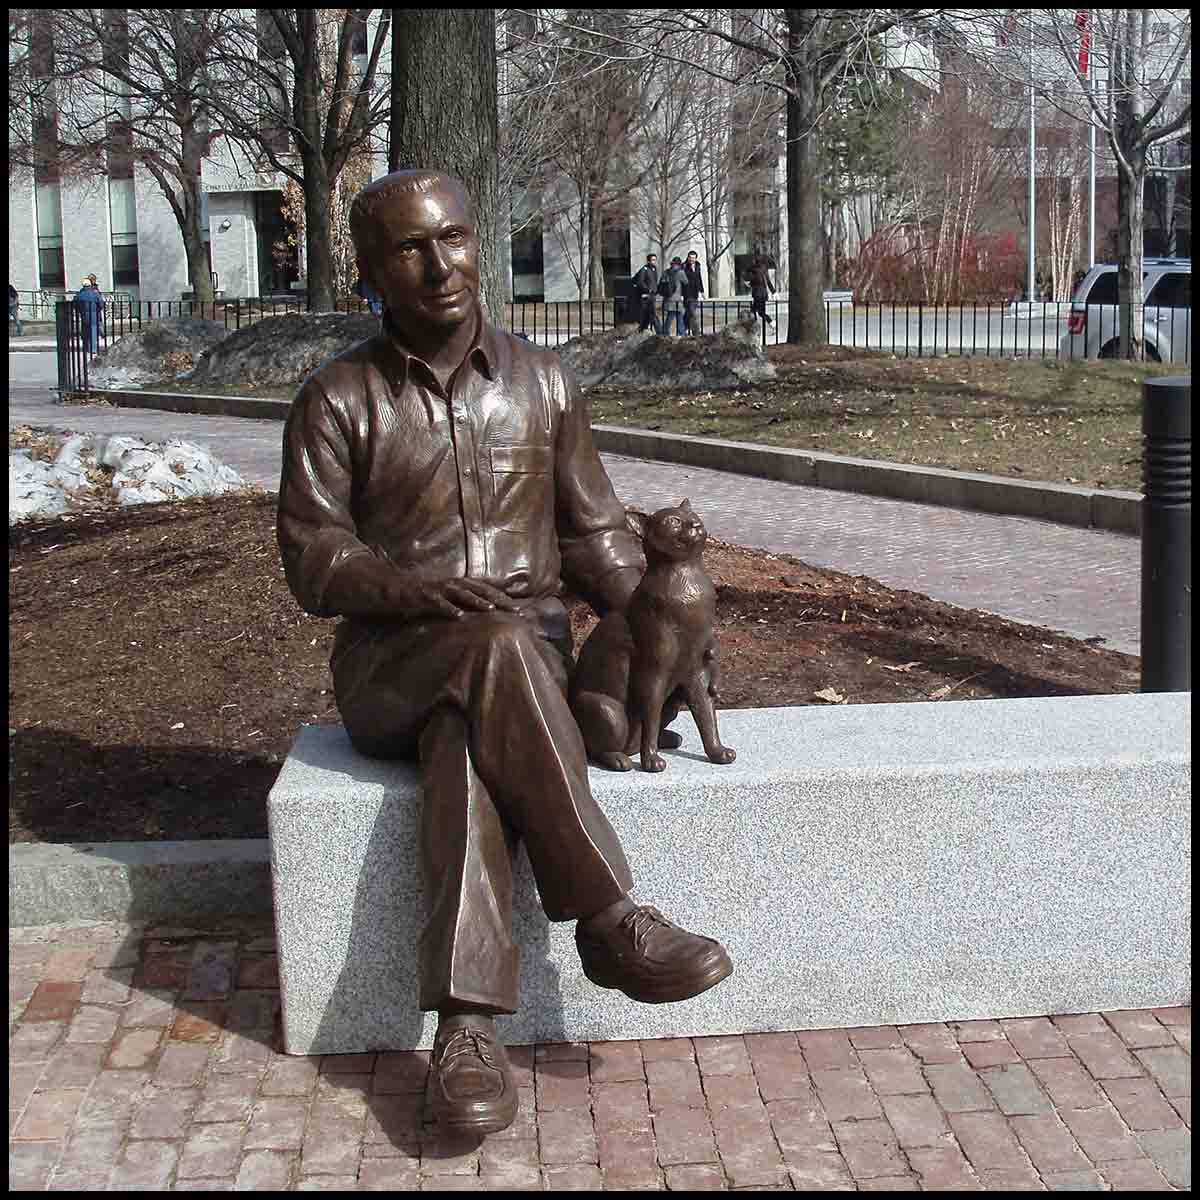 photo of bronze-colored sculpture of seated man crossing his legs petting the cat beside him